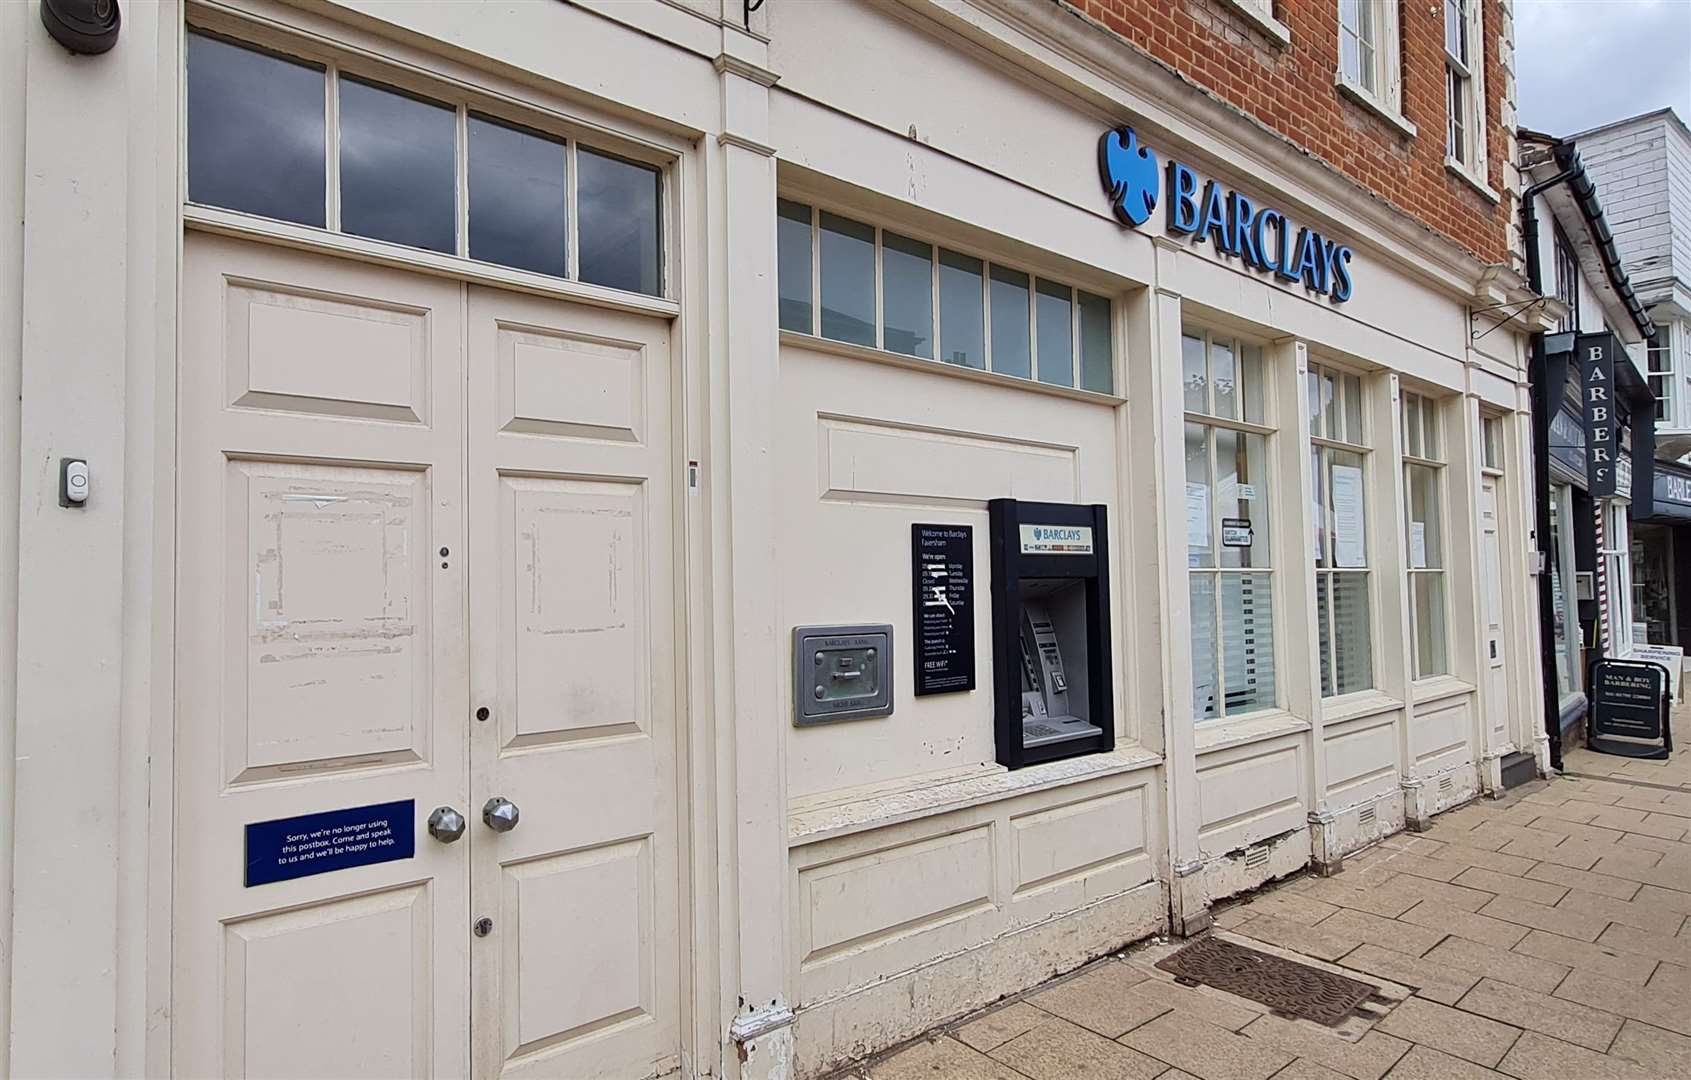 The former Barclays bank in Court Street, Faversham, pictured here in 2021